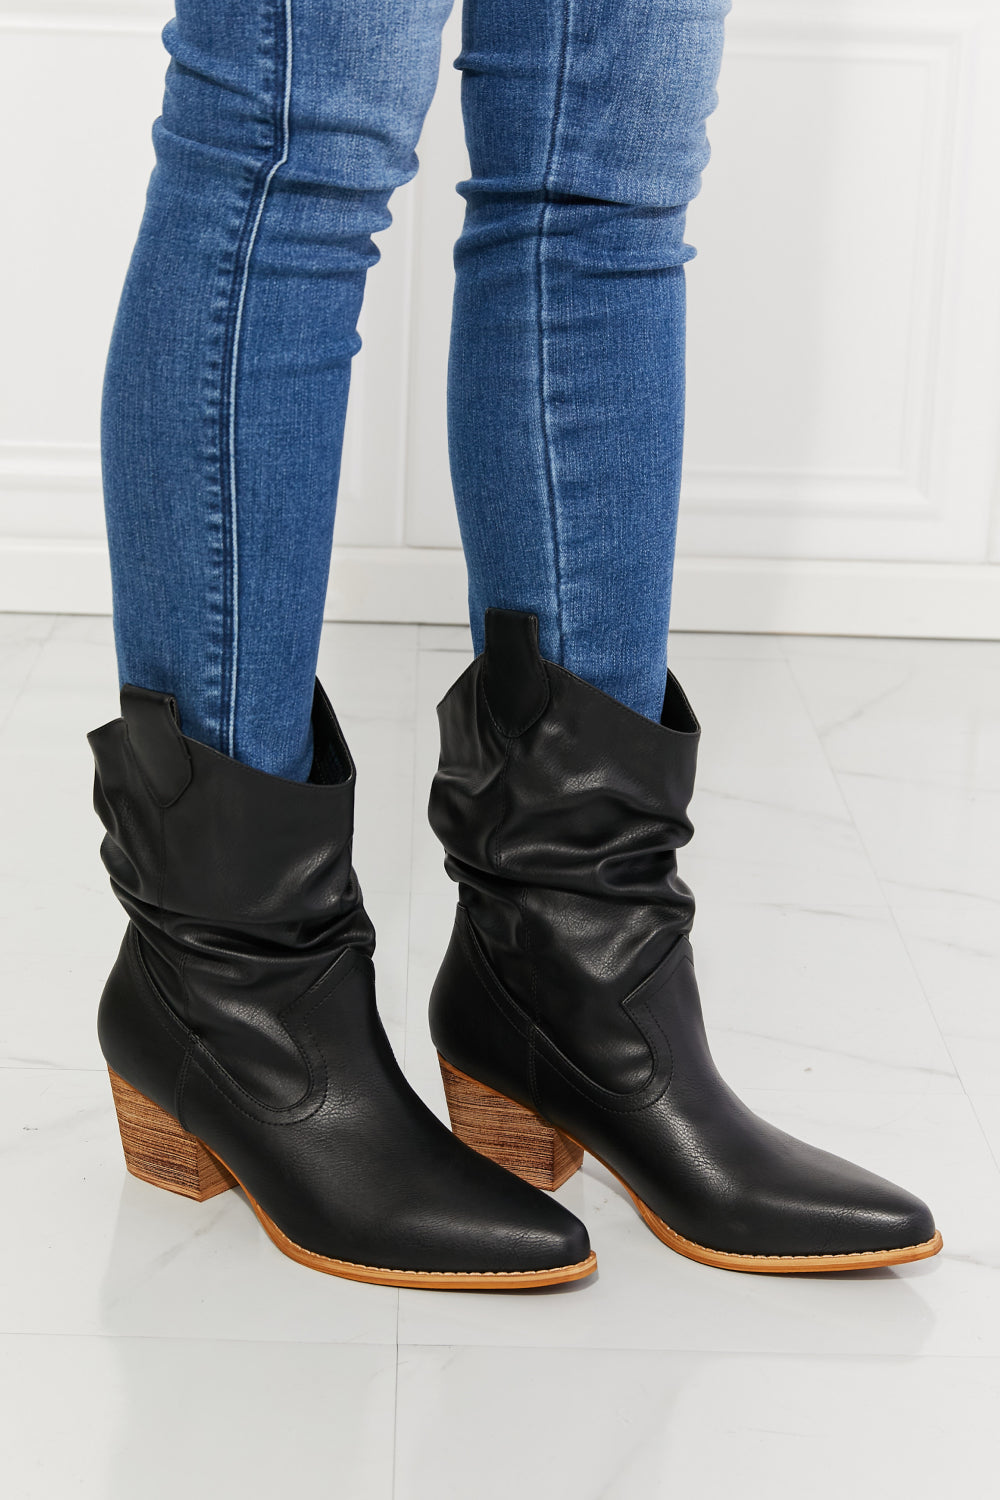 MMShoes Better in Texas Scrunch Cowboy Boots in Black - Tigbul's Fashion